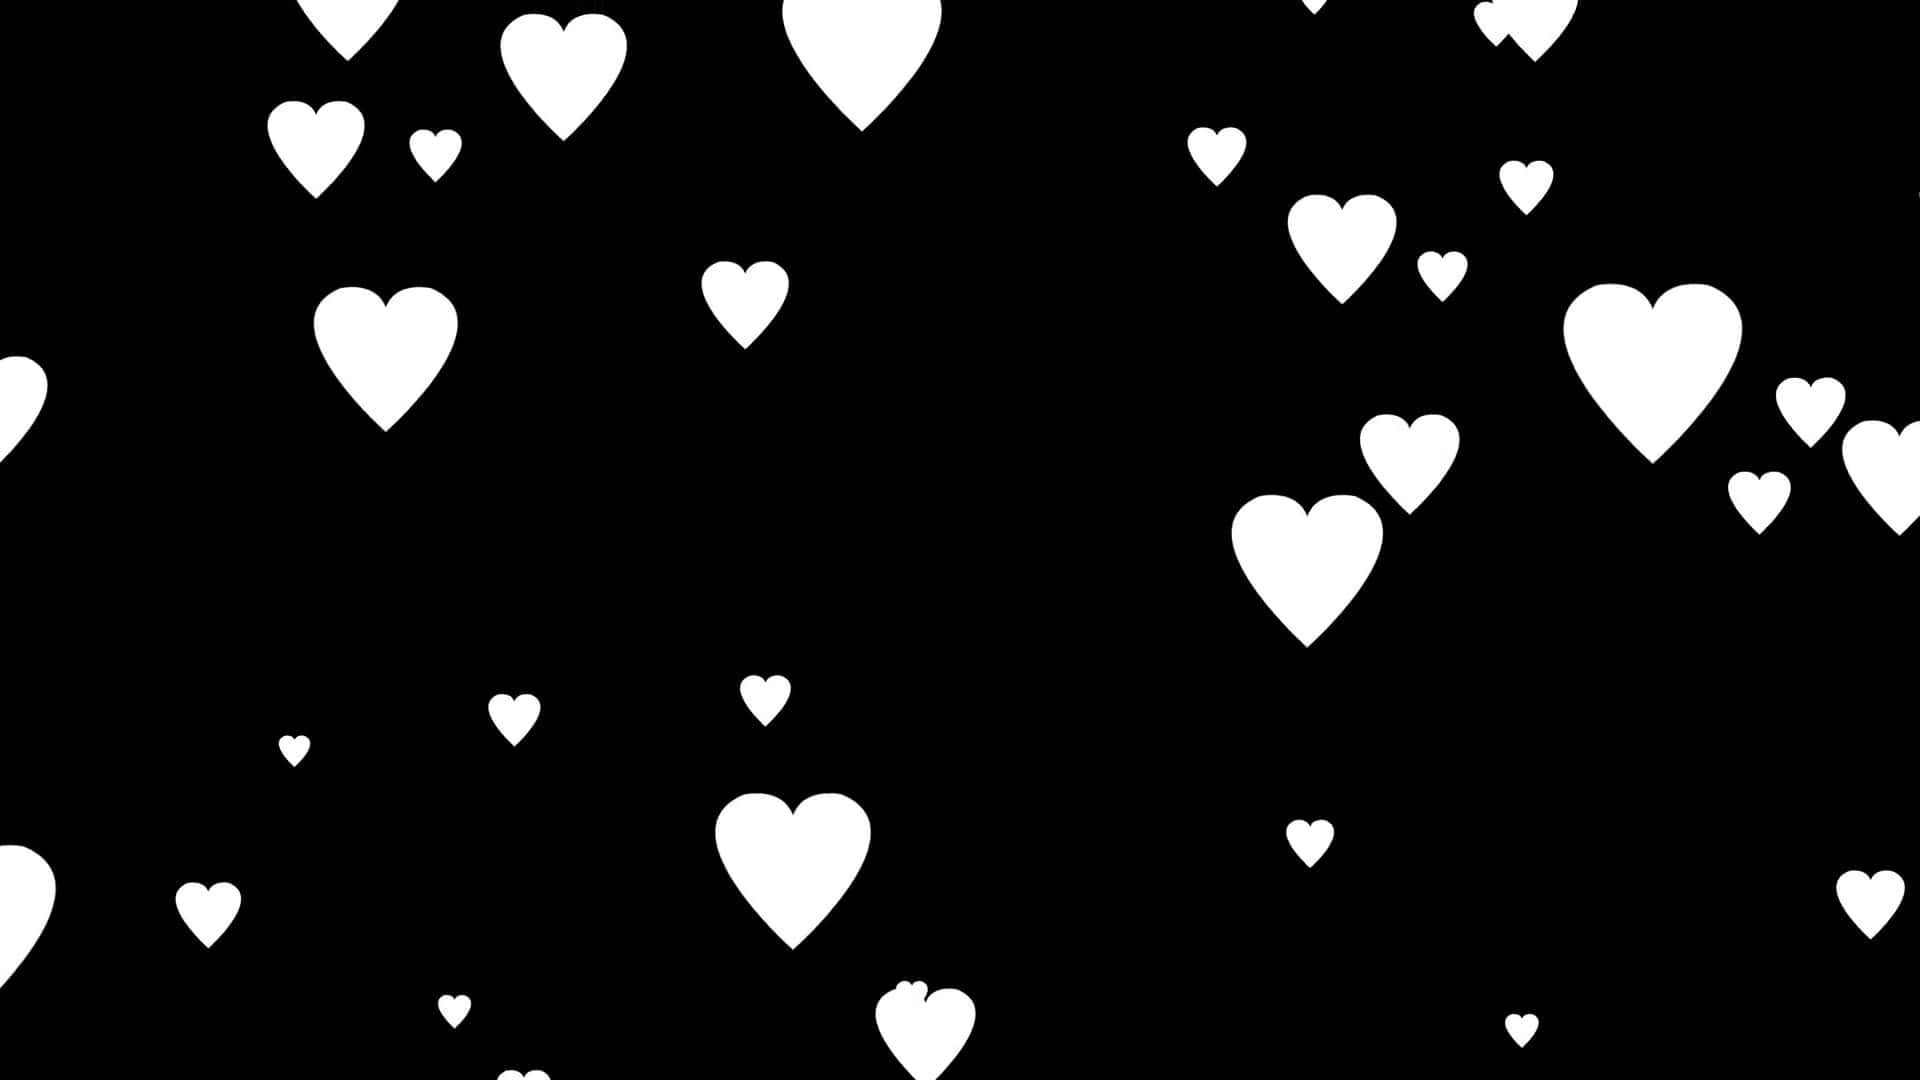 Download Black And White Heart 1920 X 1080 Background | Wallpapers.com